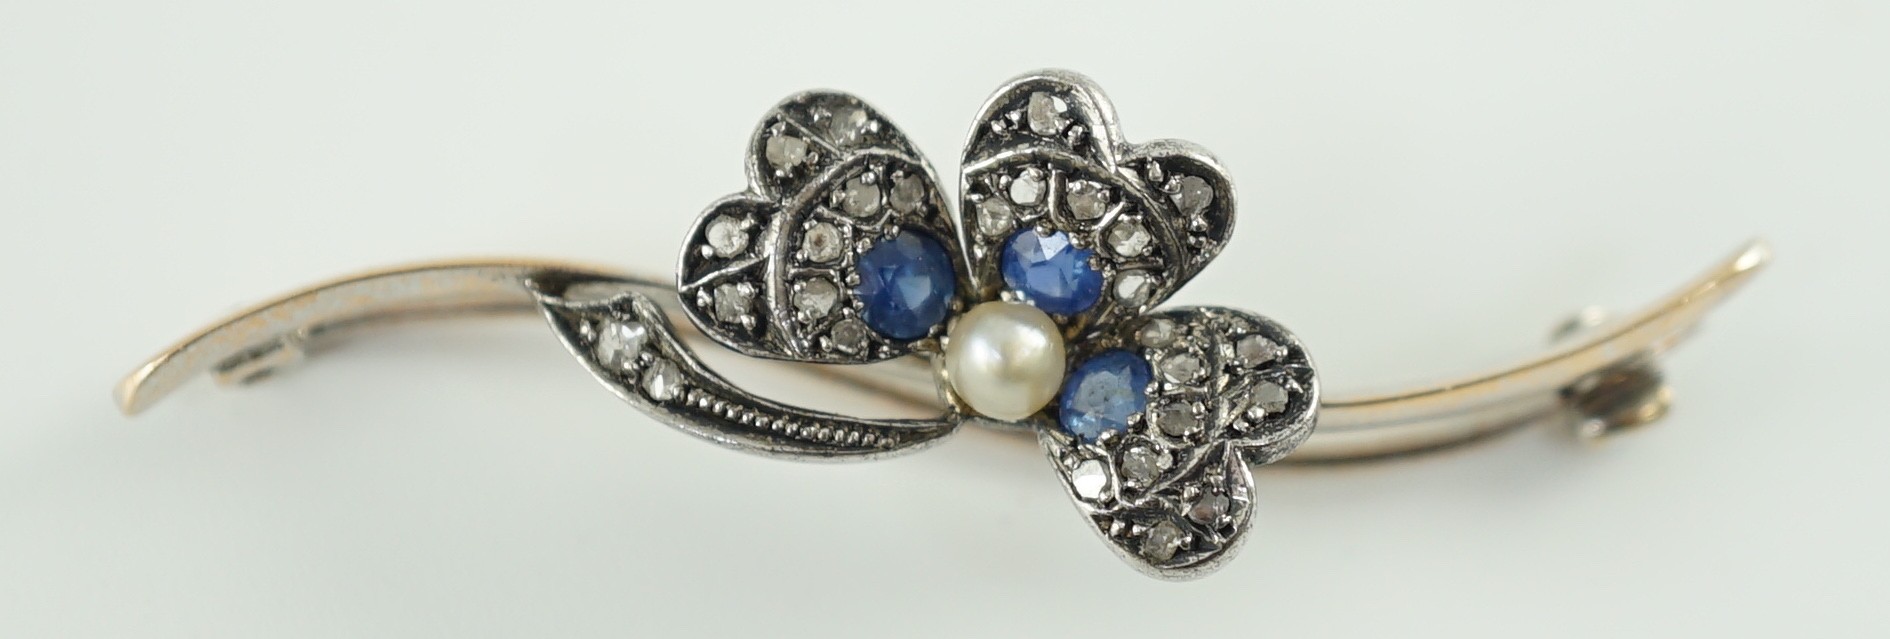 A 1920’s white gold, sapphire, cultured pearl and rose cut diamond set shamrock bar brooch, numbered - Image 4 of 4